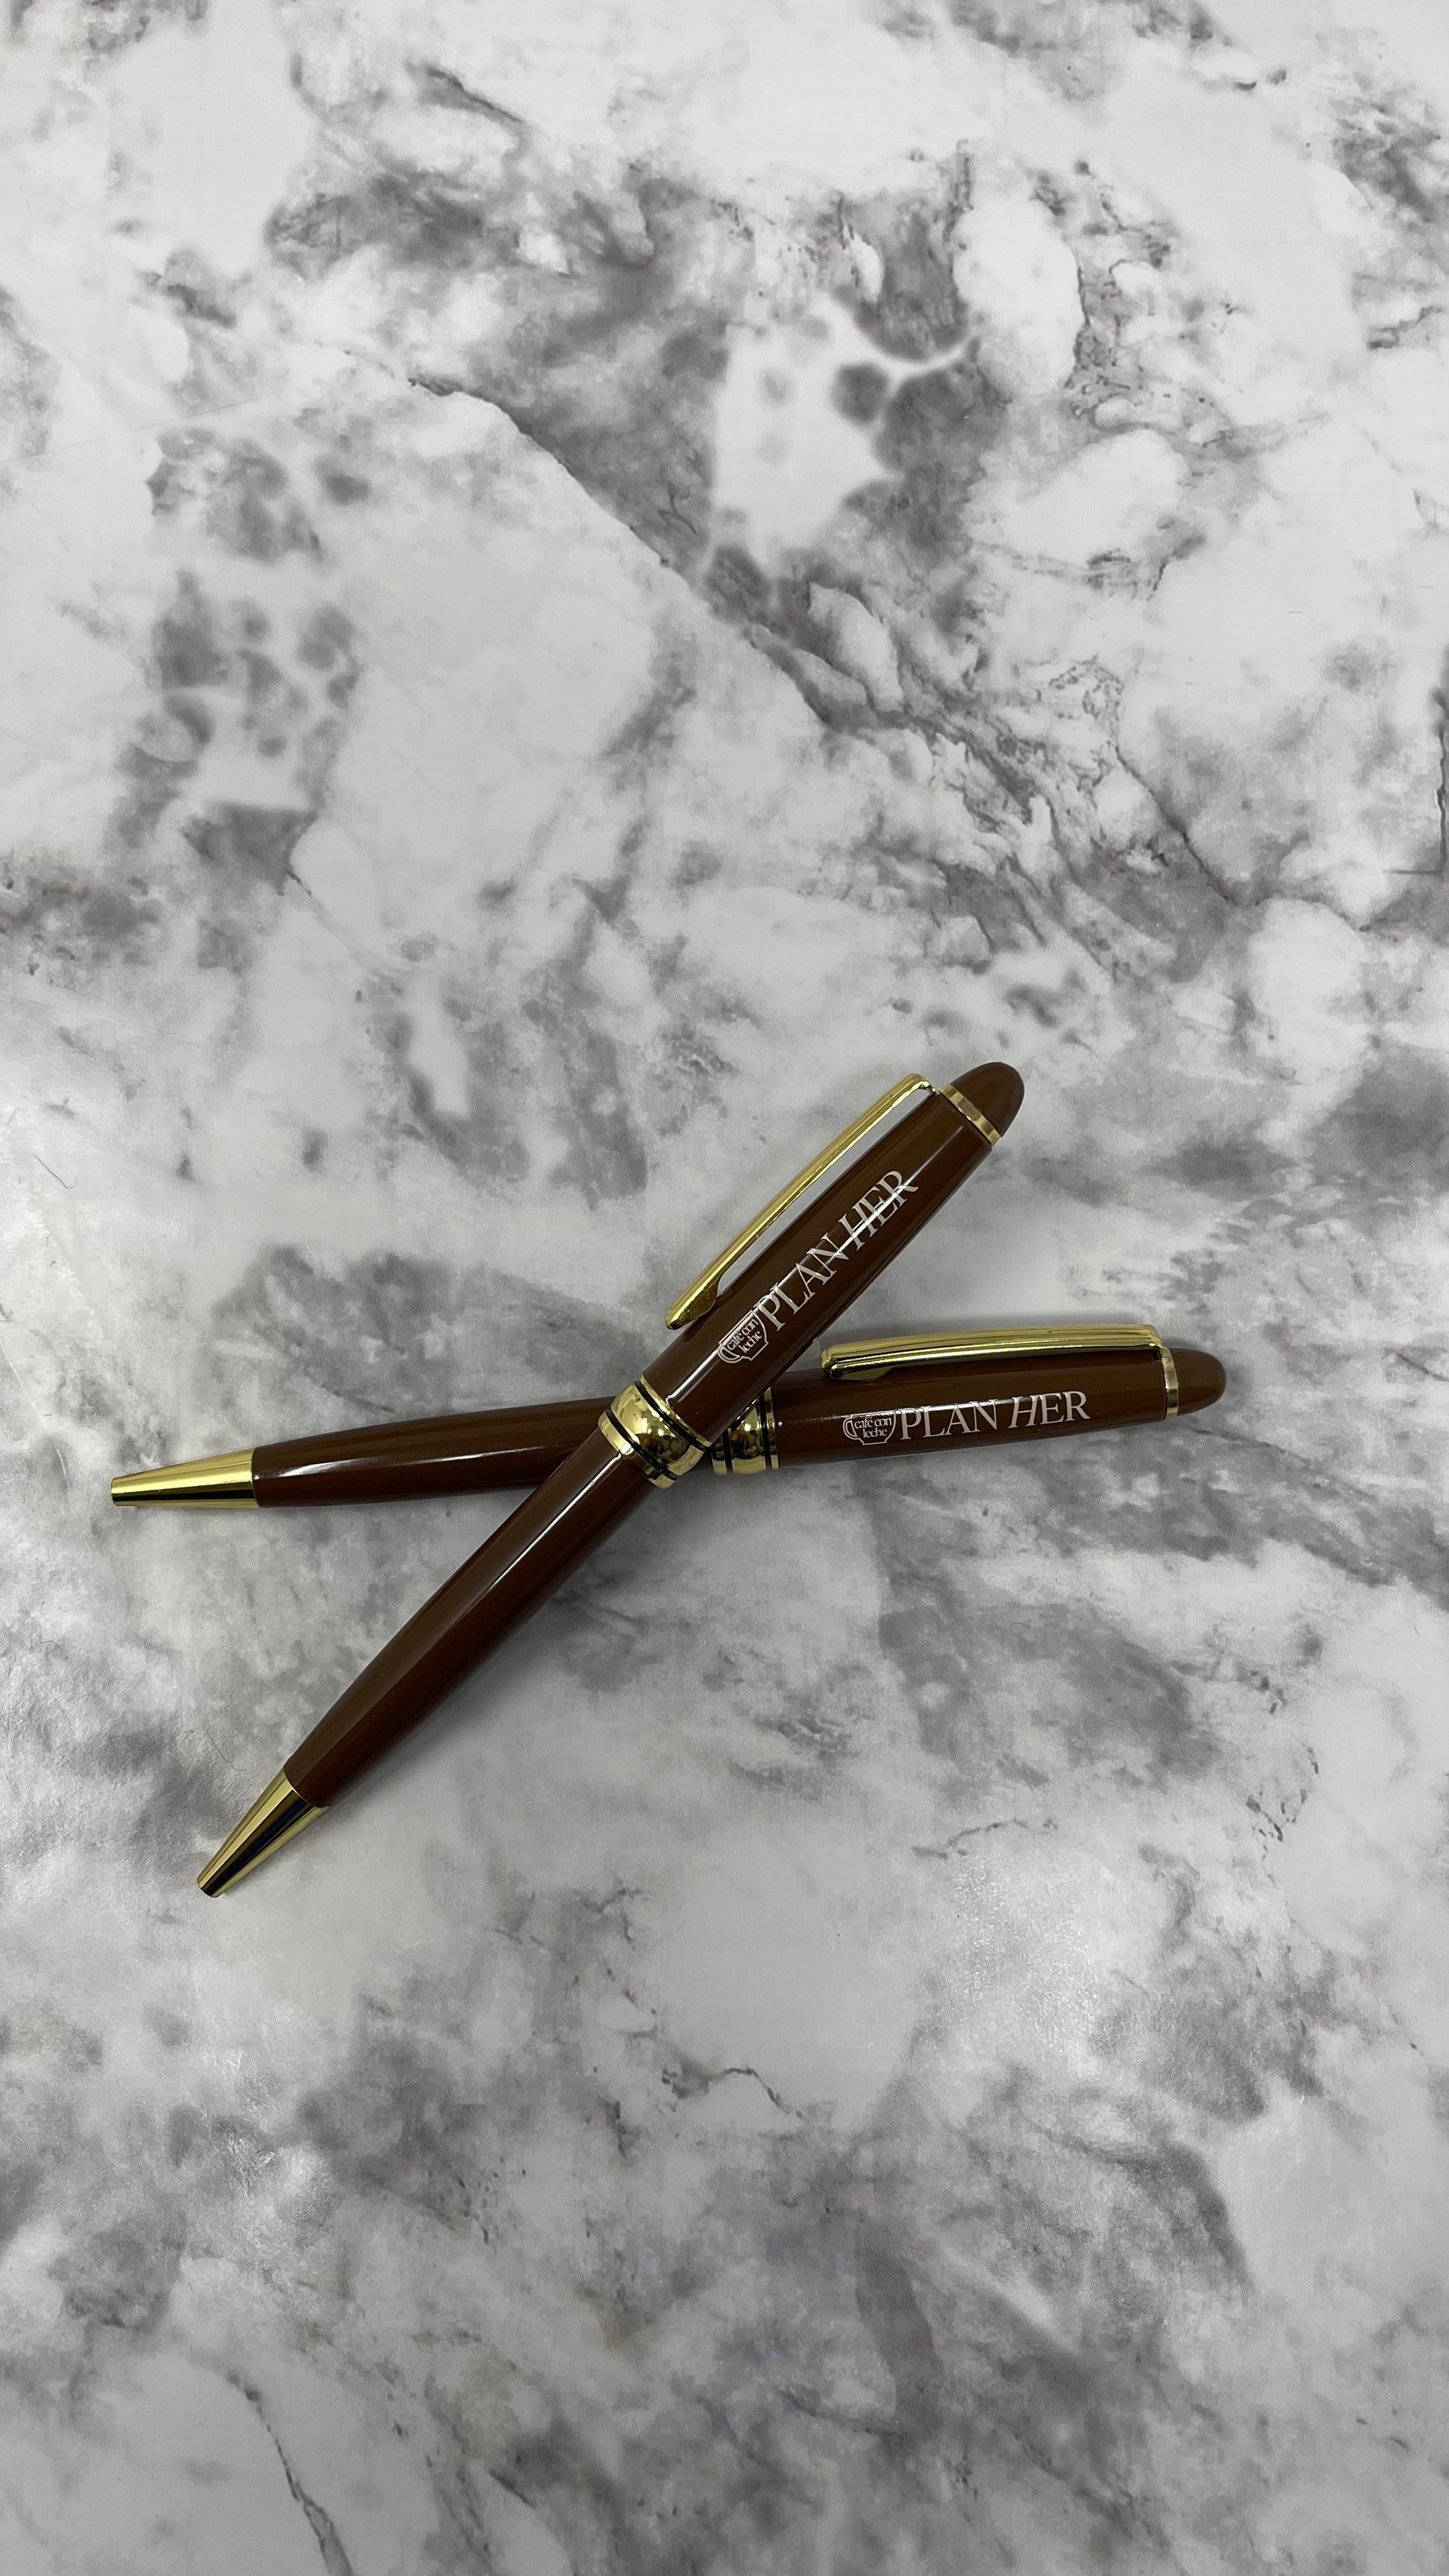 This stylish blue ink pen features a brown barrel with a gold-colored metal tip, making it the perfect writing companion. With a 1.0mm tip, it provides precise, clear lines that won't smudge or bleed. The pen also features the logo, giving it a unique, eye-catching look. Whether you're writing a letter, taking notes, or just doodling, this pen is sure to make a statement.